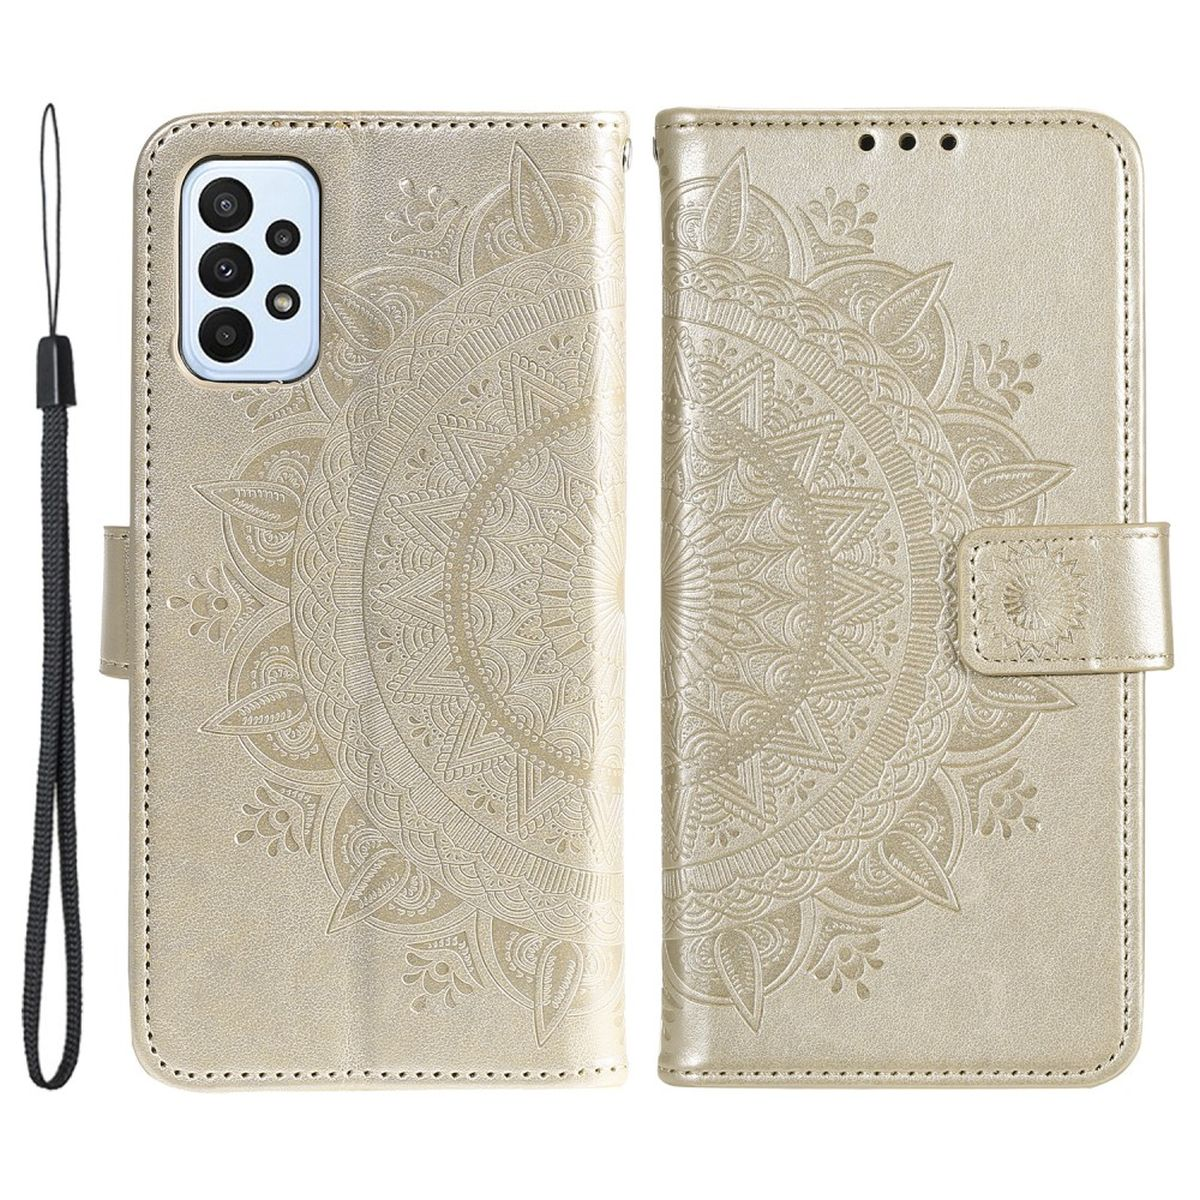 COVERKINGZ Klapphülle mit Mandala Muster, Bookcover, Galaxy Gold A23, Samsung